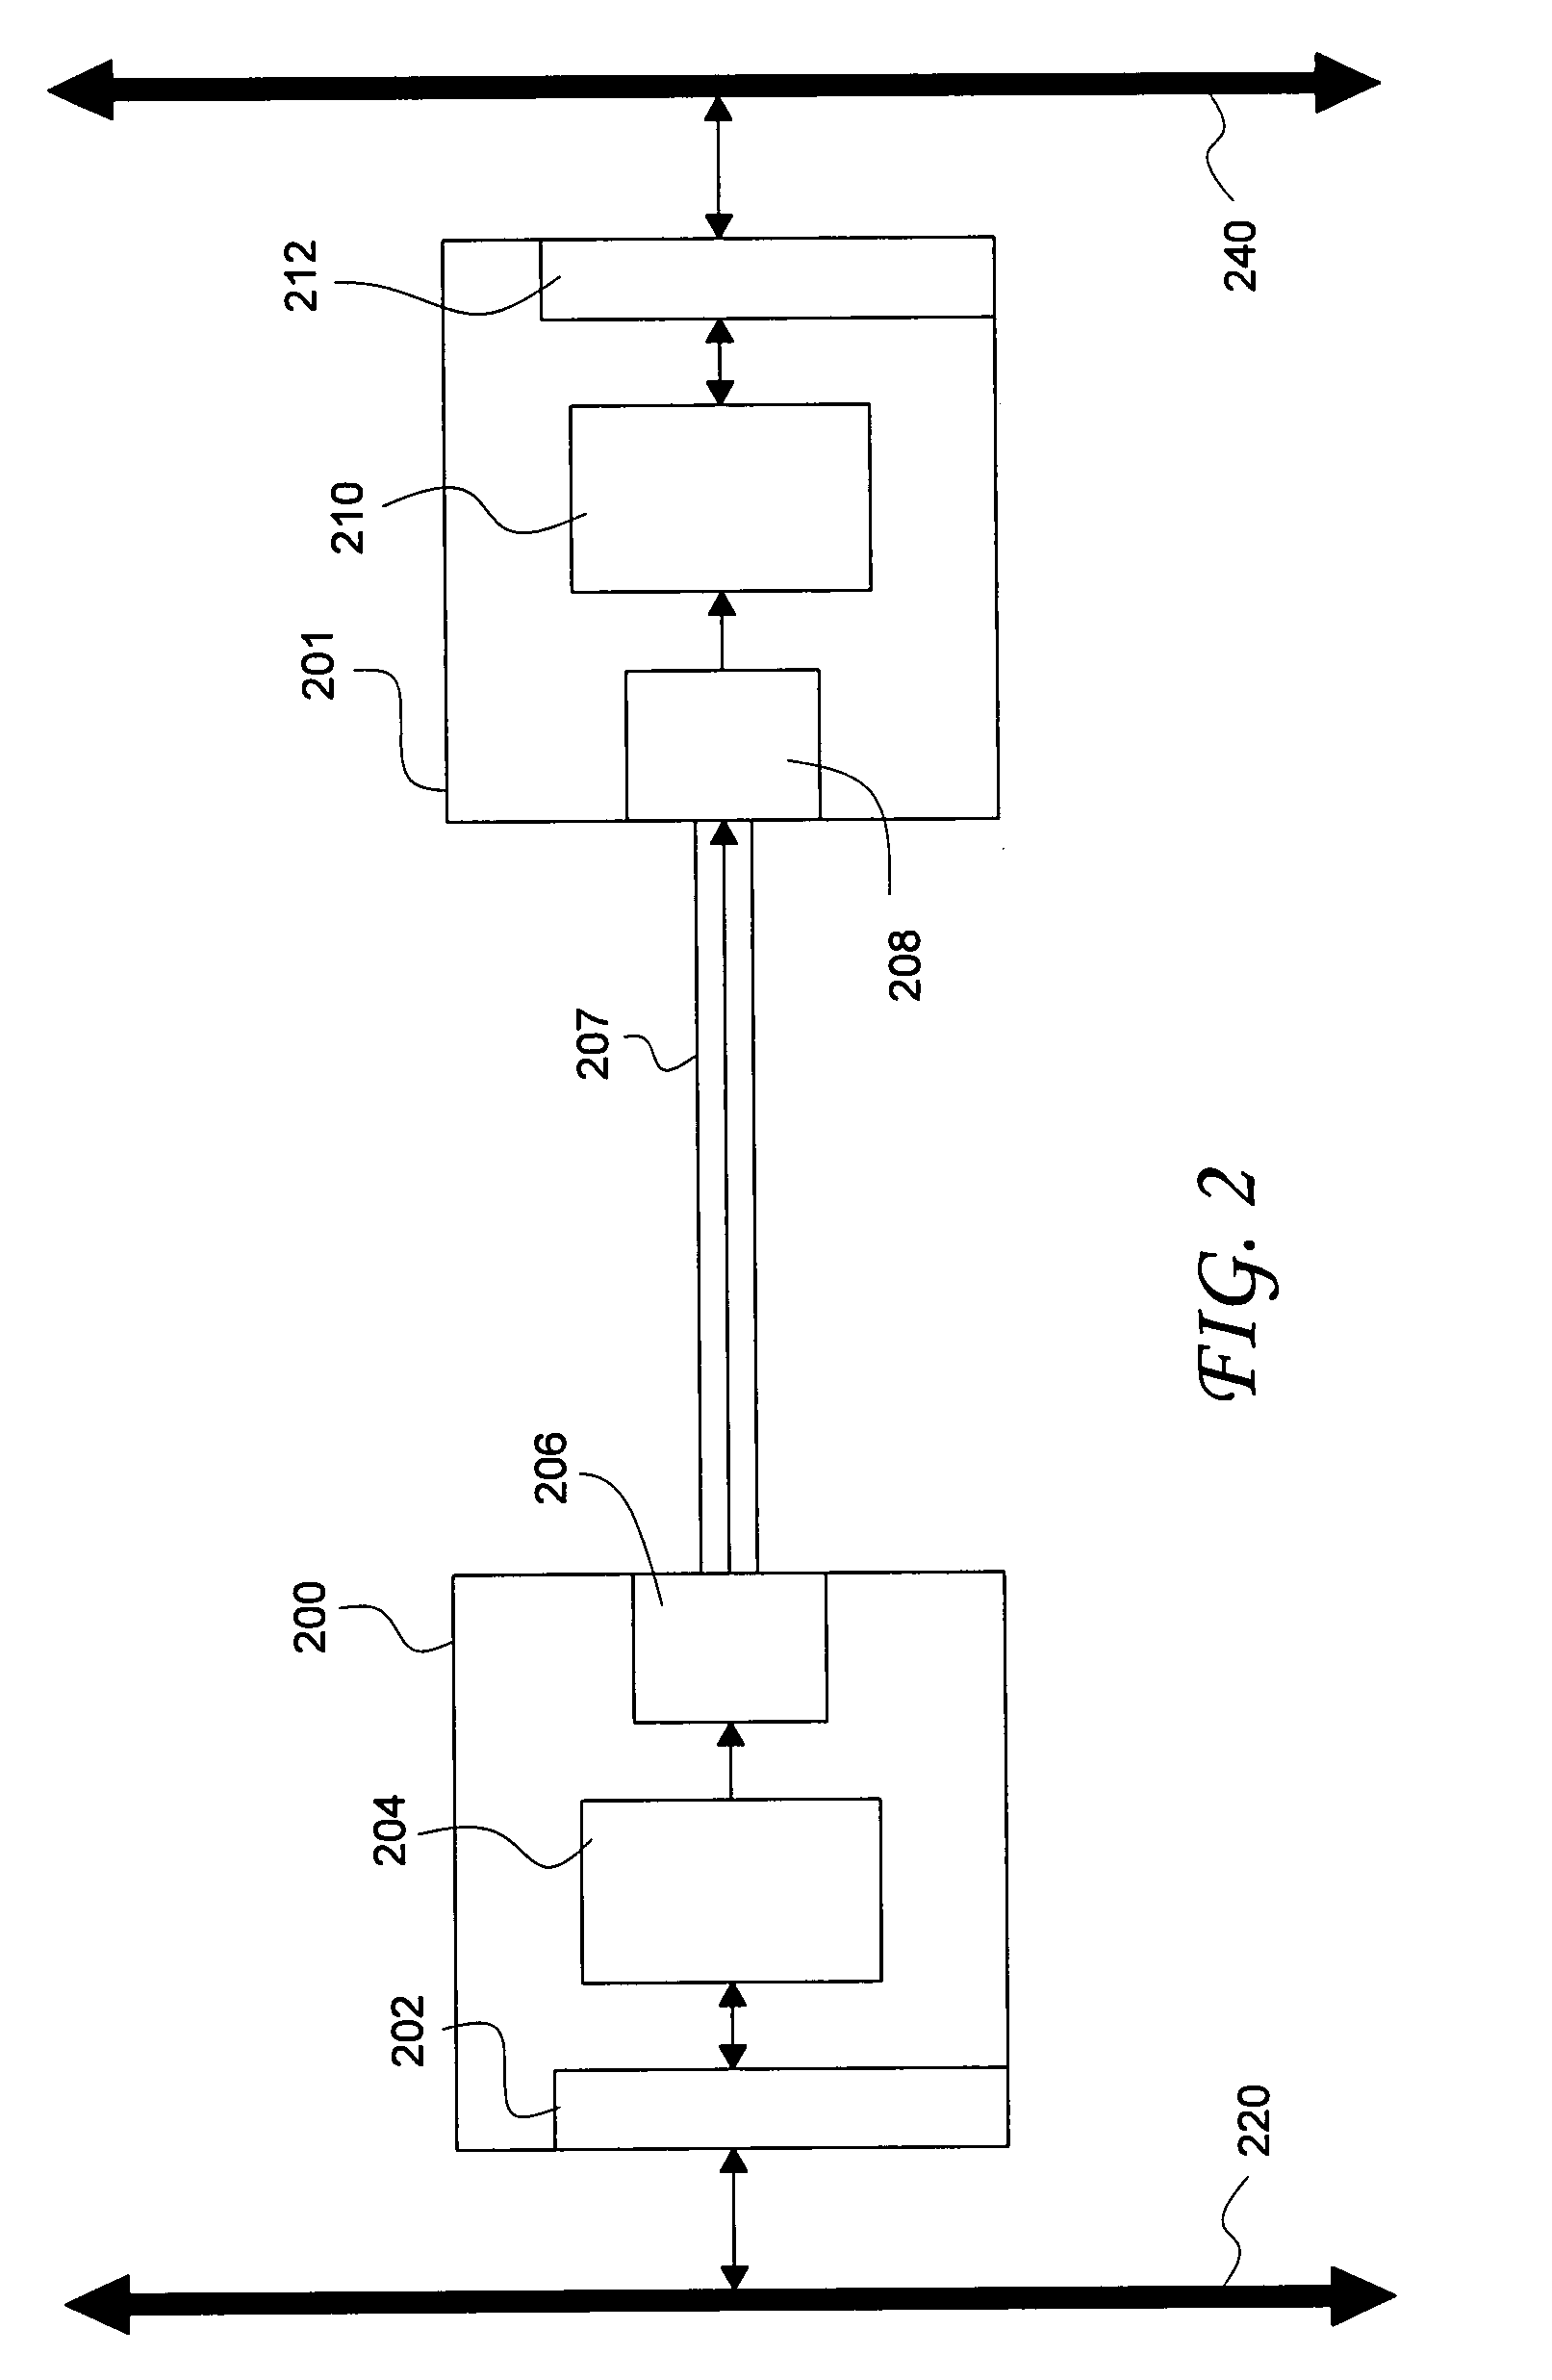 Secure one-way data transfer using communication interface circuitry